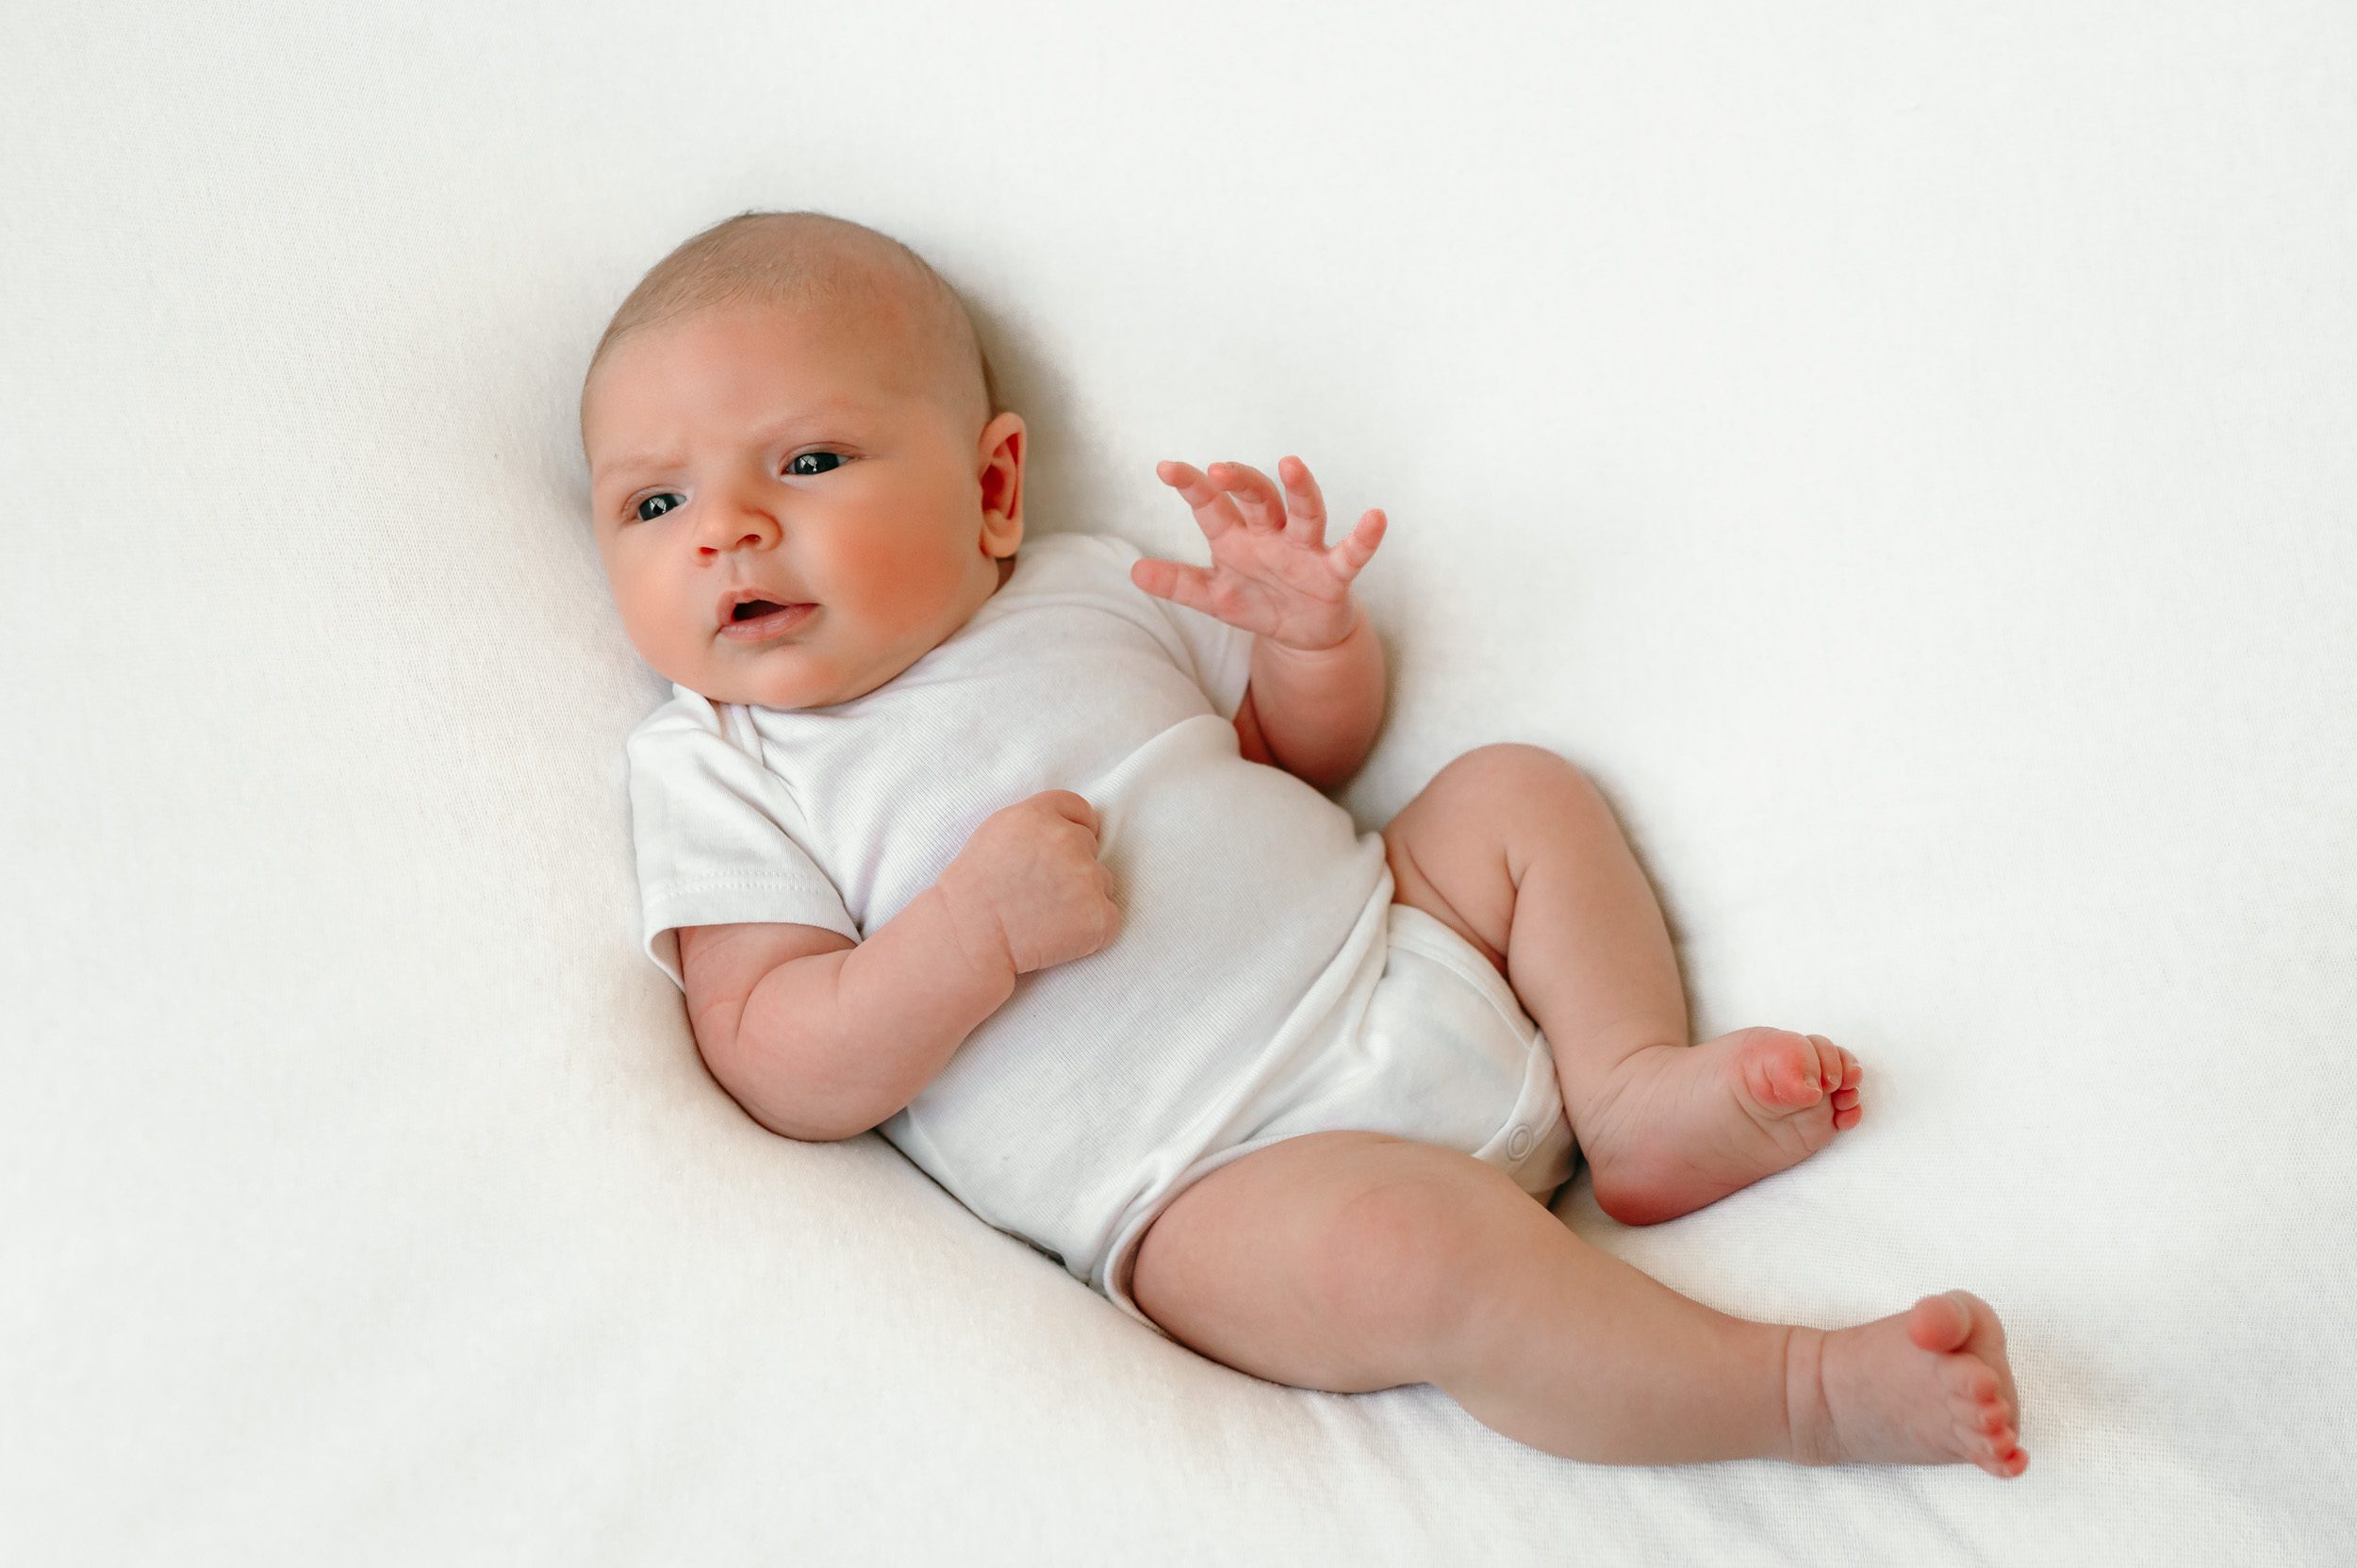 A newborn baby boy in a white onesie on a white backdrop during his natural newborn photo session